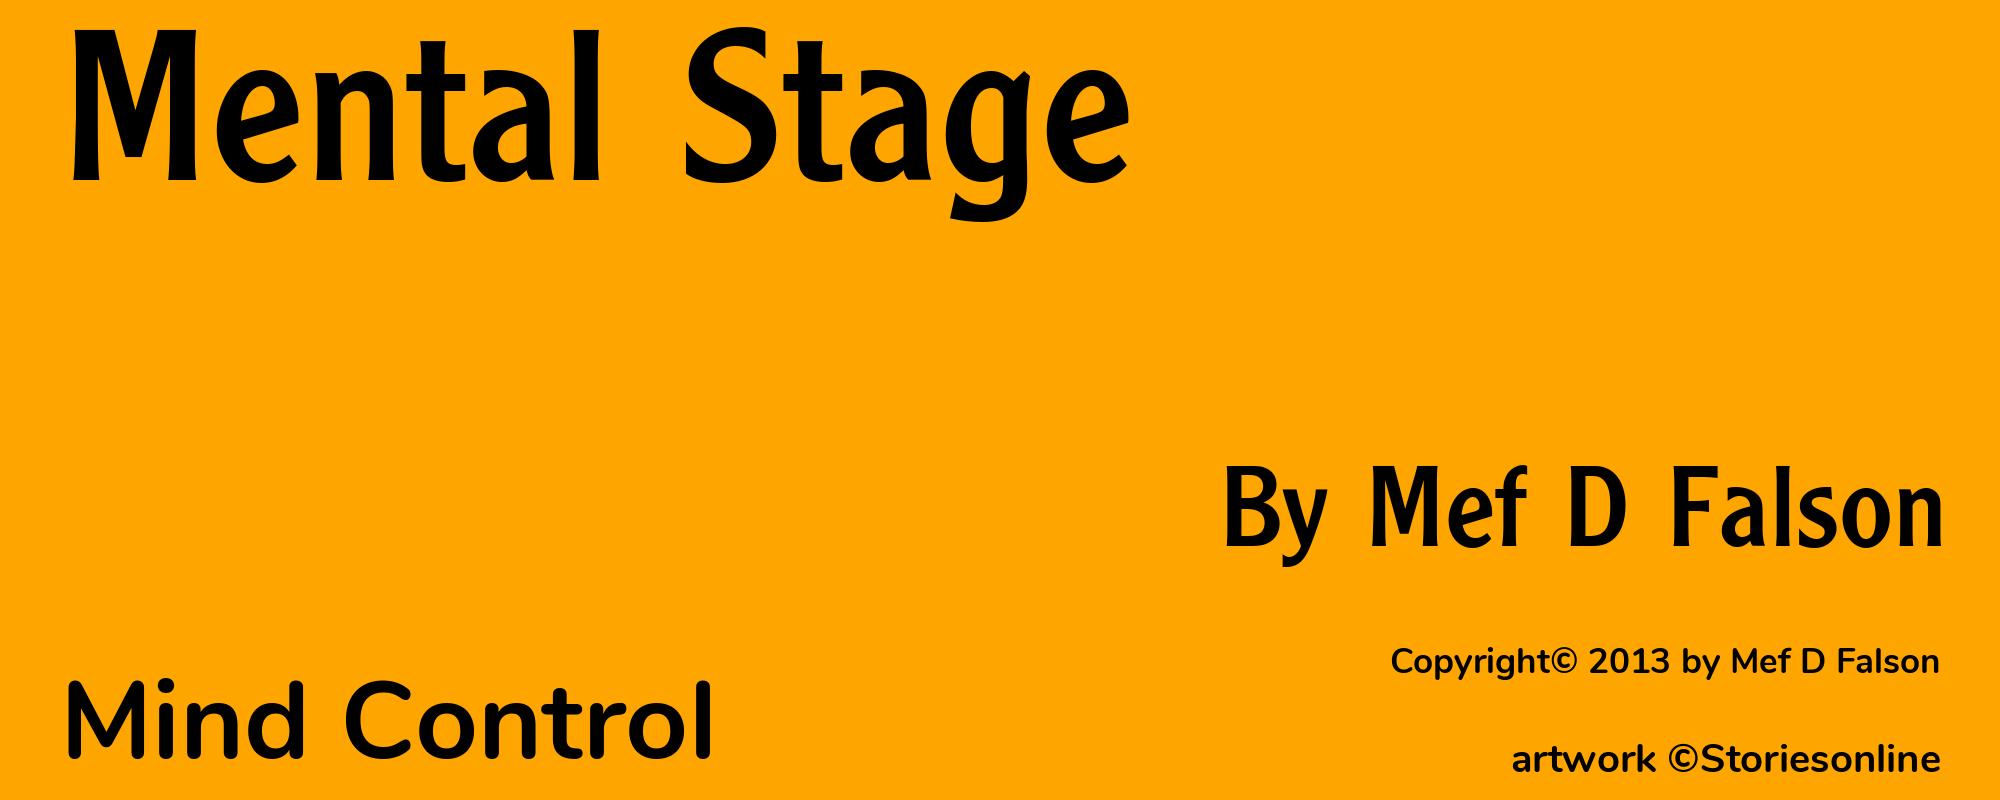 Mental Stage - Cover